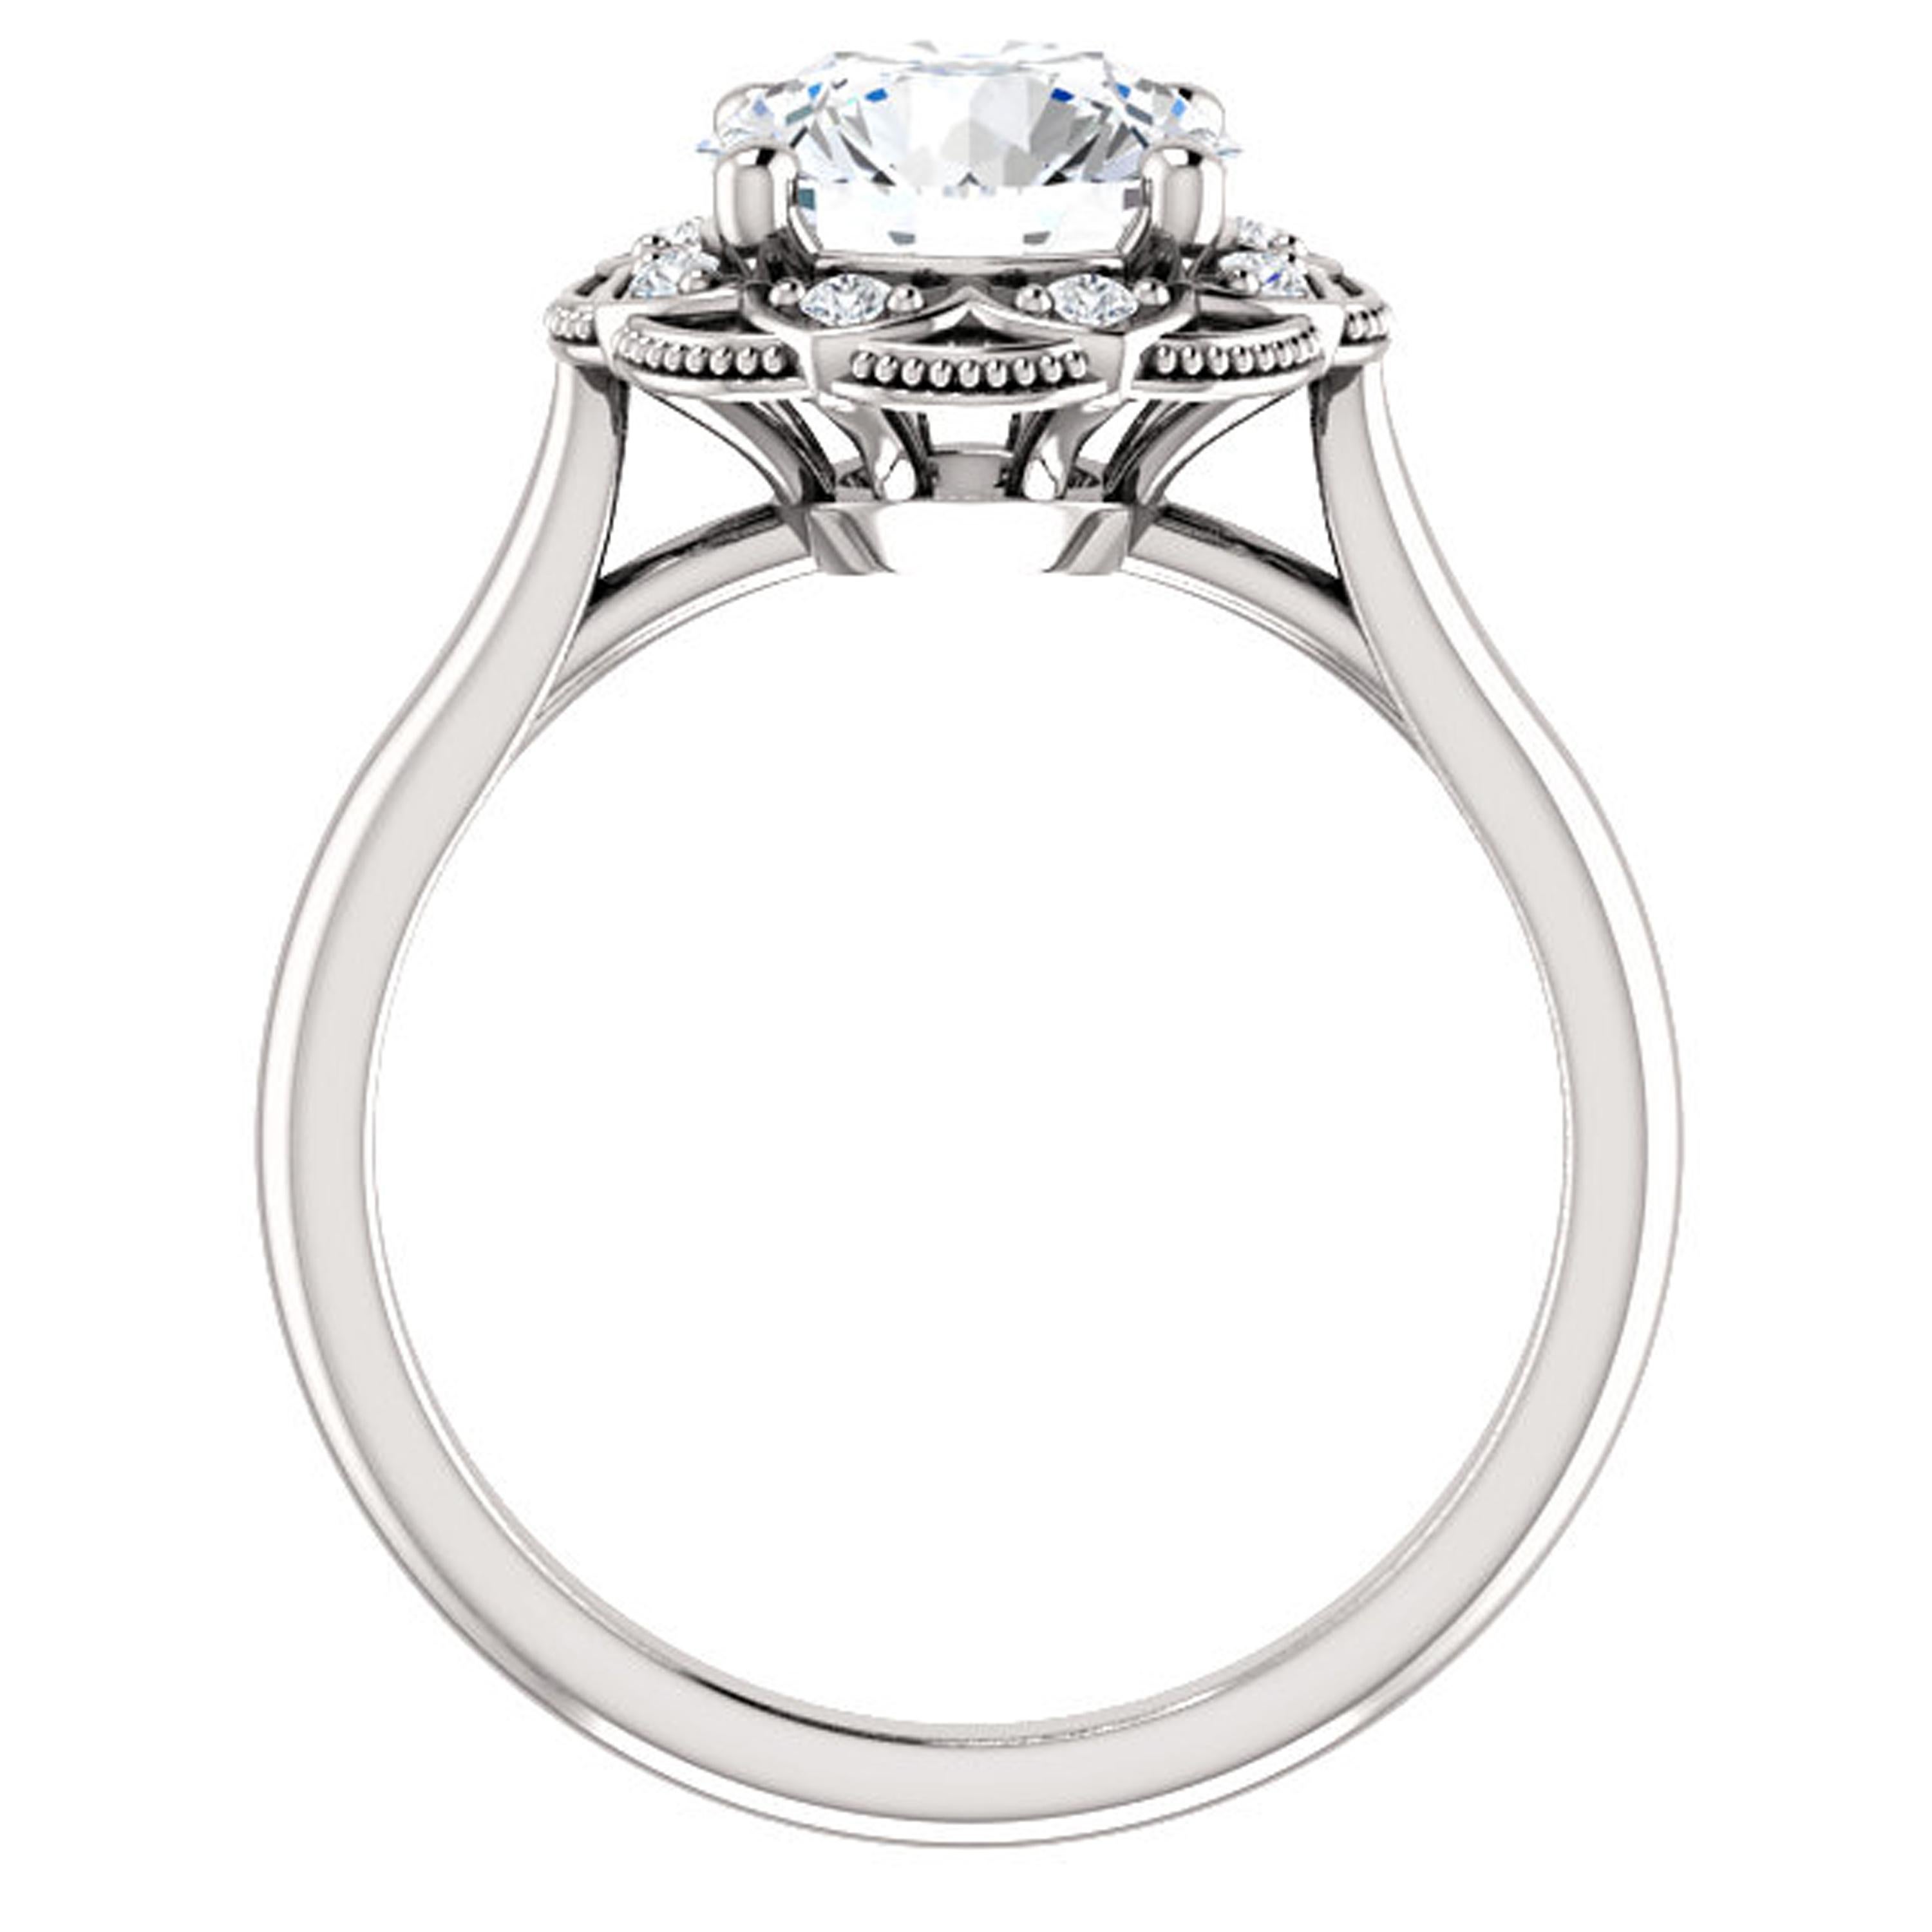 A scalloped halo of shimmering diamonds adorns this vintage inspired engagement ring. Sparkling diamonds dance around the center stone.

Center Stone:
1 Round-cut Natural Diamond
Diamond Weight: 0.75 Carat
Diamond Color: K
Diamond Clarity: I1
Cut